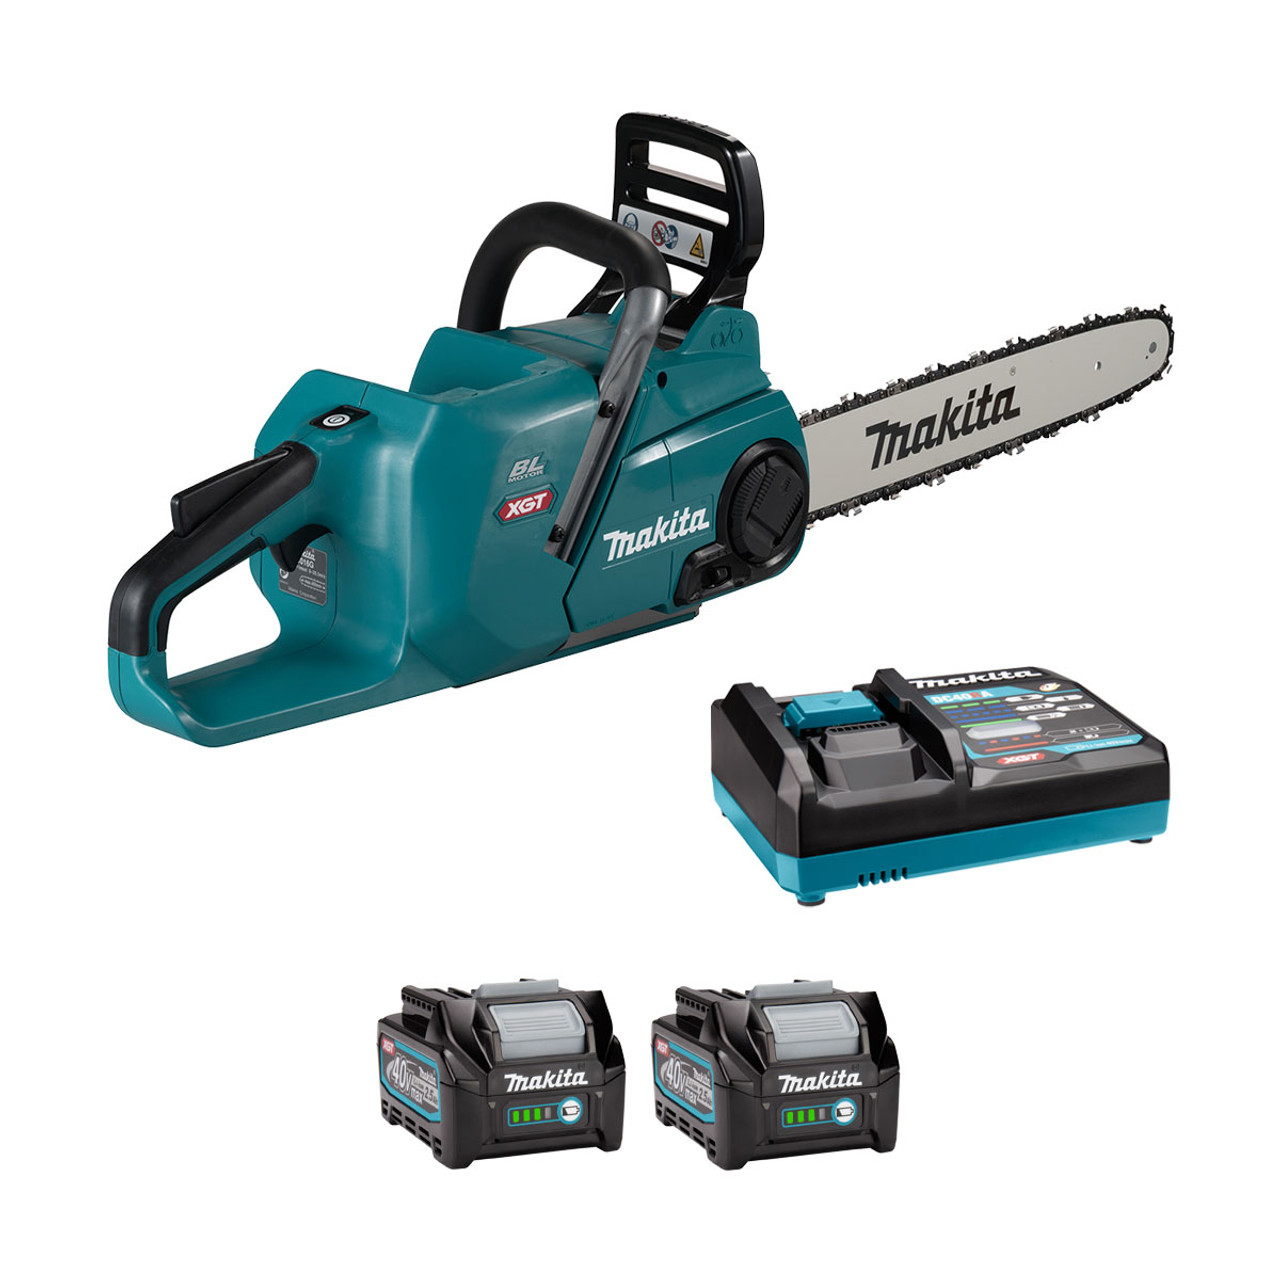 Makita UC016GT201 40v Max XGT Brushless 400mm Chainsaw (All Versions)